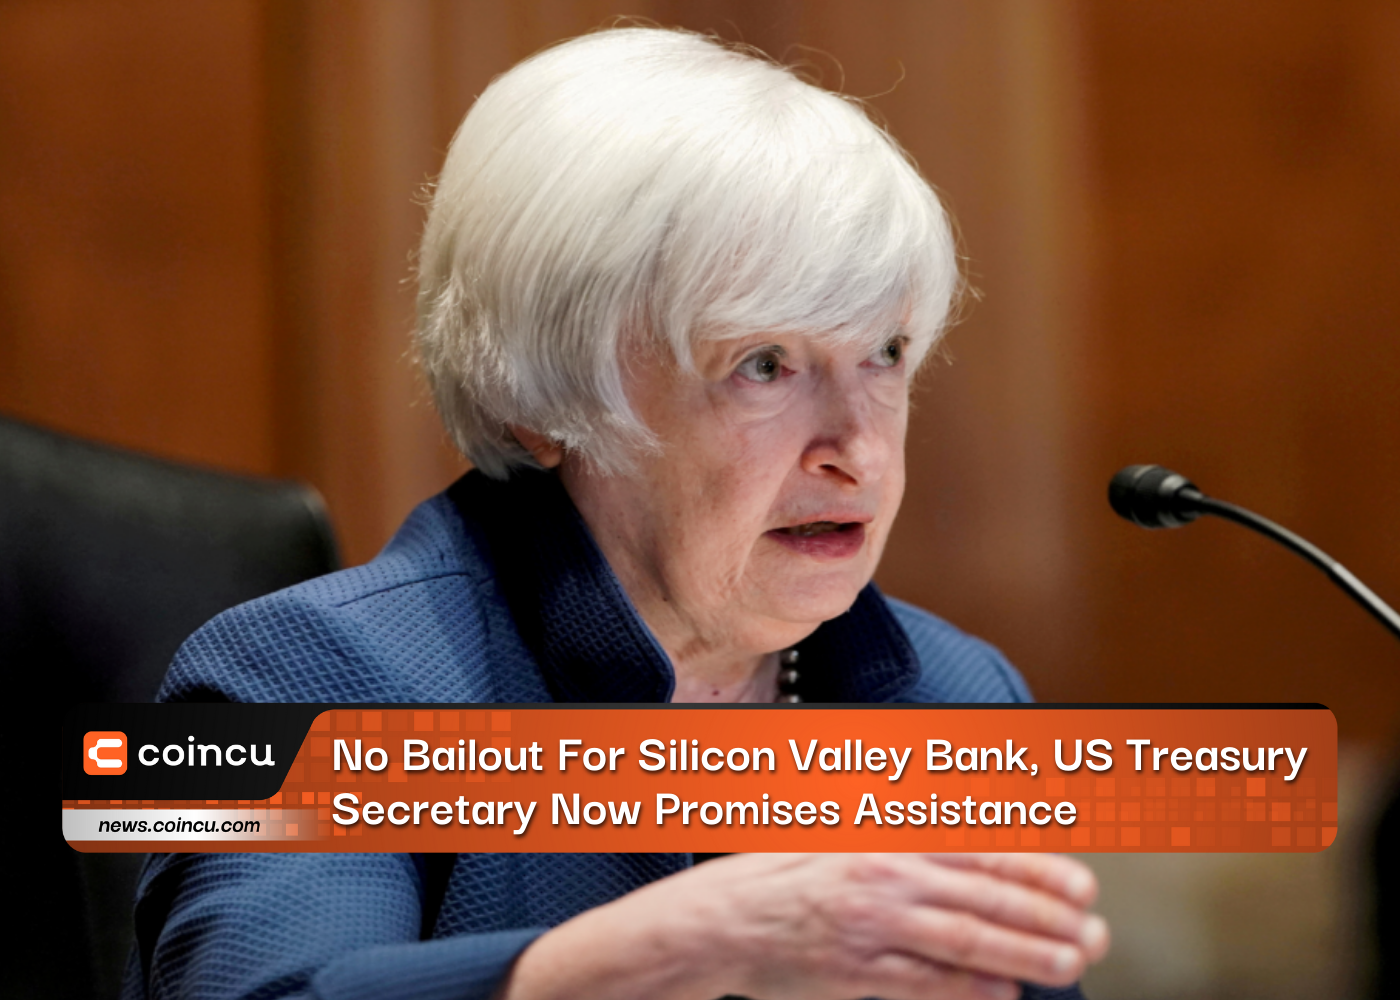 No Bailout For Silicon Valley Bank, US Treasury Secretary Now Promises Assistance